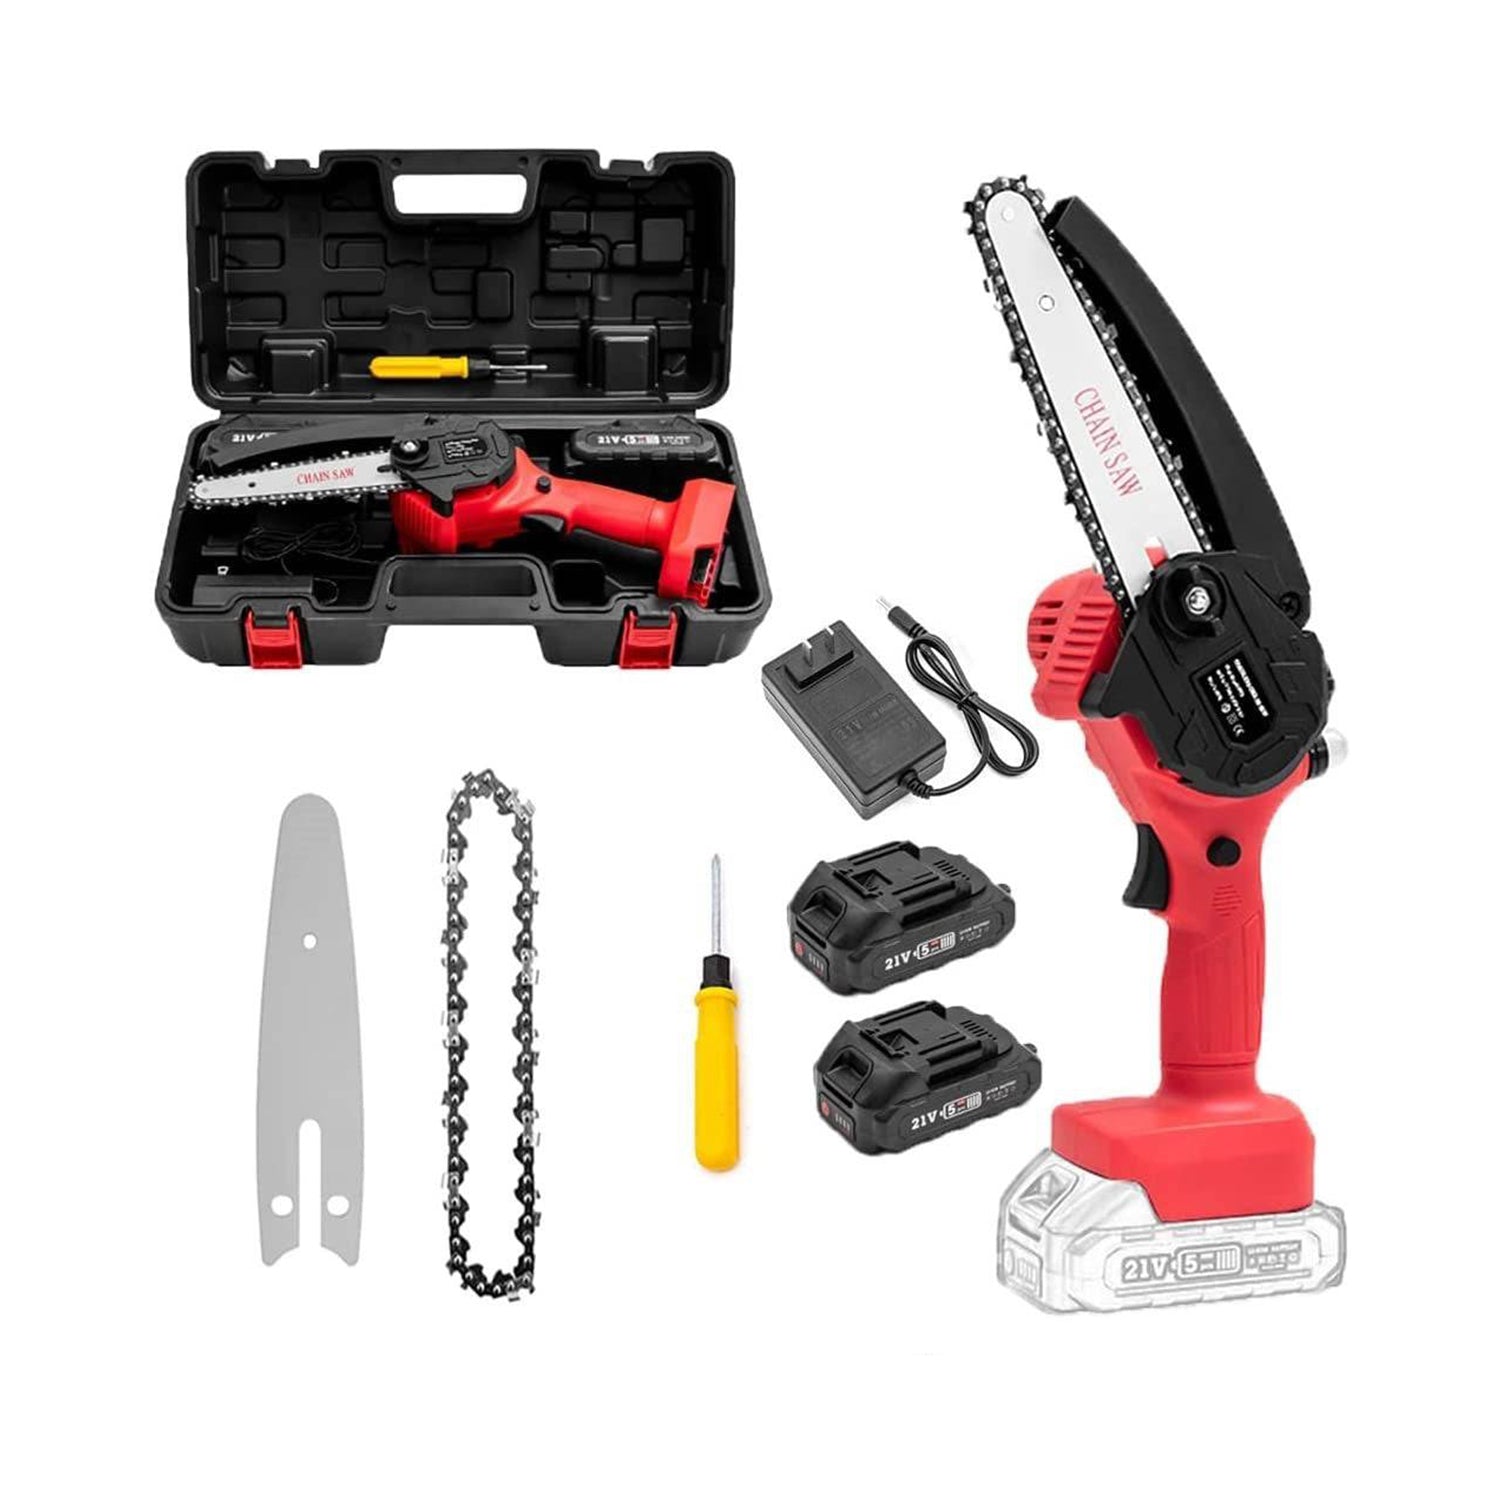 Cordless Electric Mini Chainsaw Rechargeable 6in Wood Cutter Saw